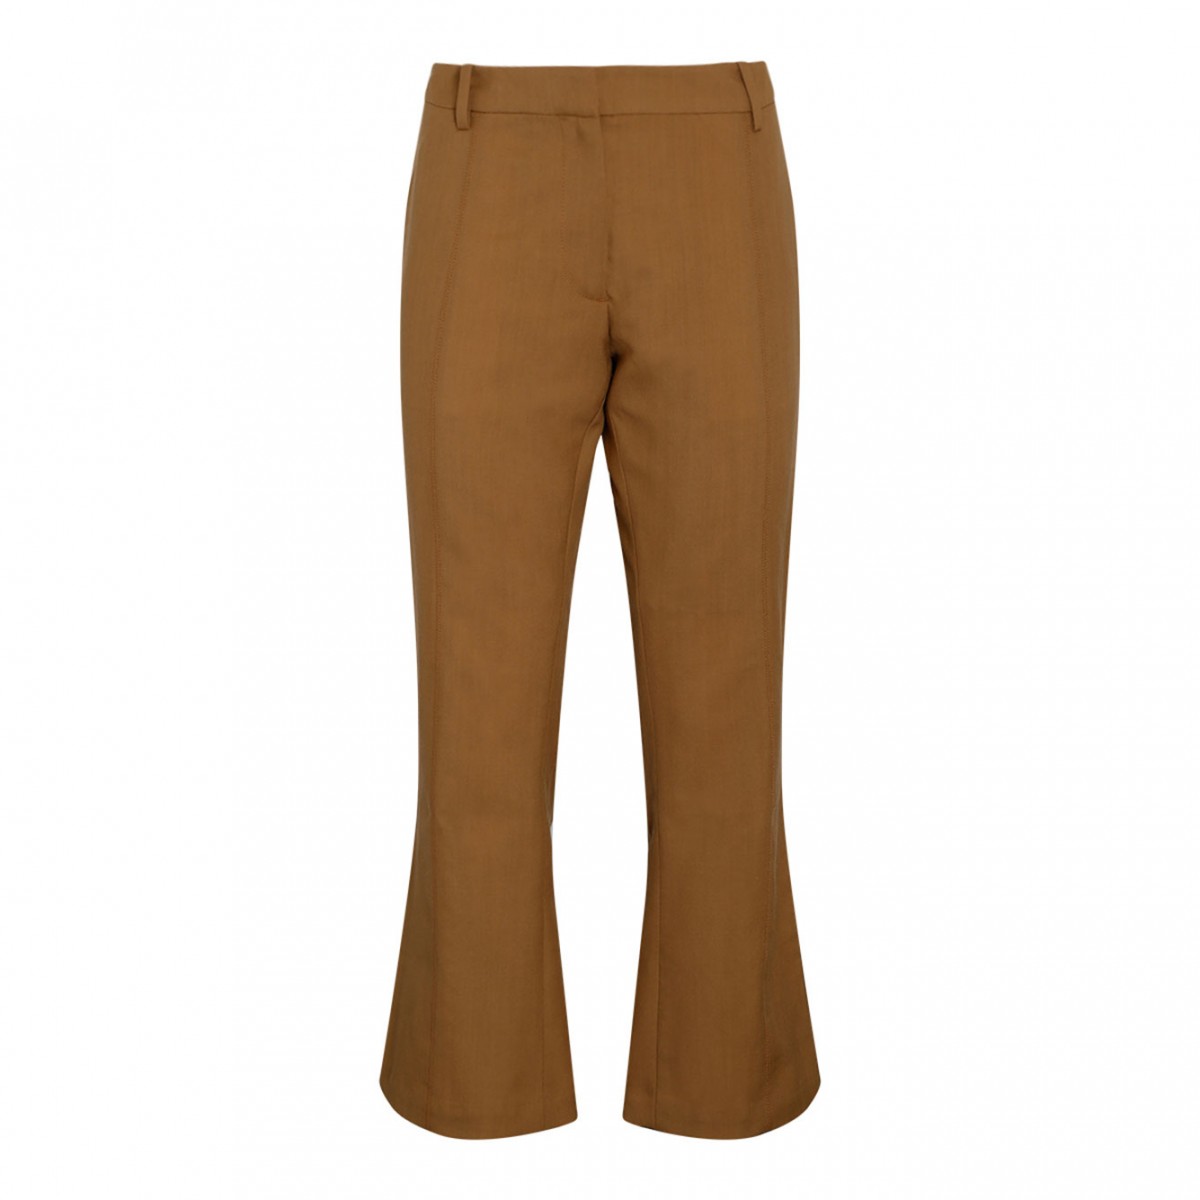 Marni Camel Brown Virgin Wool Flared Cropped Trousers.